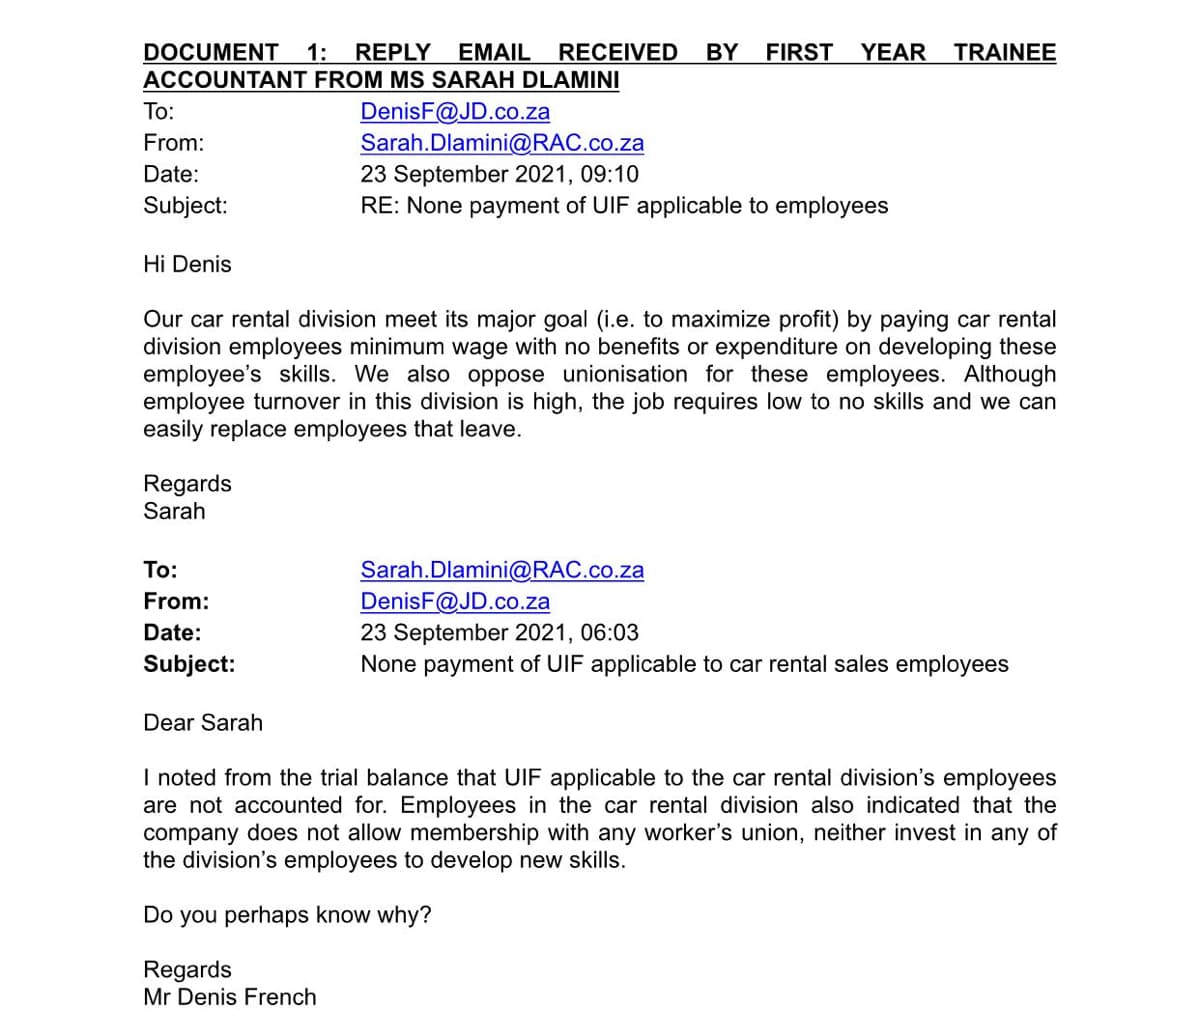 DOCUMENT 1: REPLY EMAIL RECEIVED
ACCOUNTANT FROM MS SARAH DLAMINI
BY
FIRST YEAR
TRAINEE
DenisF@JD.co.za
Sarah.Dlamini@RAC.co.za
23 September 2021, 09:10
RE: None payment of UIF applicable to employees
То:
From:
Date:
Subject:
Hi Denis
Our car rental division meet its major goal (i.e. to maximize profit) by paying car rental
division employees minimum wage with no benefits or expenditure on developing these
employee's skills. We also oppose unionisation for these employees. Although
employee turnover in this division is high, the job requires low to no skills and we can
easily replace employees that leave.
Regards
Sarah
Sarah.Dlamini@RAC.co.za
DenisF@JD.co.za
23 September 2021, 06:03
None payment of UIF applicable to car rental sales employees
To:
From:
Date:
Subject:
Dear Sarah
I noted from the trial balance that UIF applicable to the car rental division's employees
are not accounted for. Employees in the car rental division also indicated that the
company does not allow membership with any worker's union, neither invest in any of
the division's employees to develop new skills.
Do you perhaps know why?
Regards
Mr Denis French
